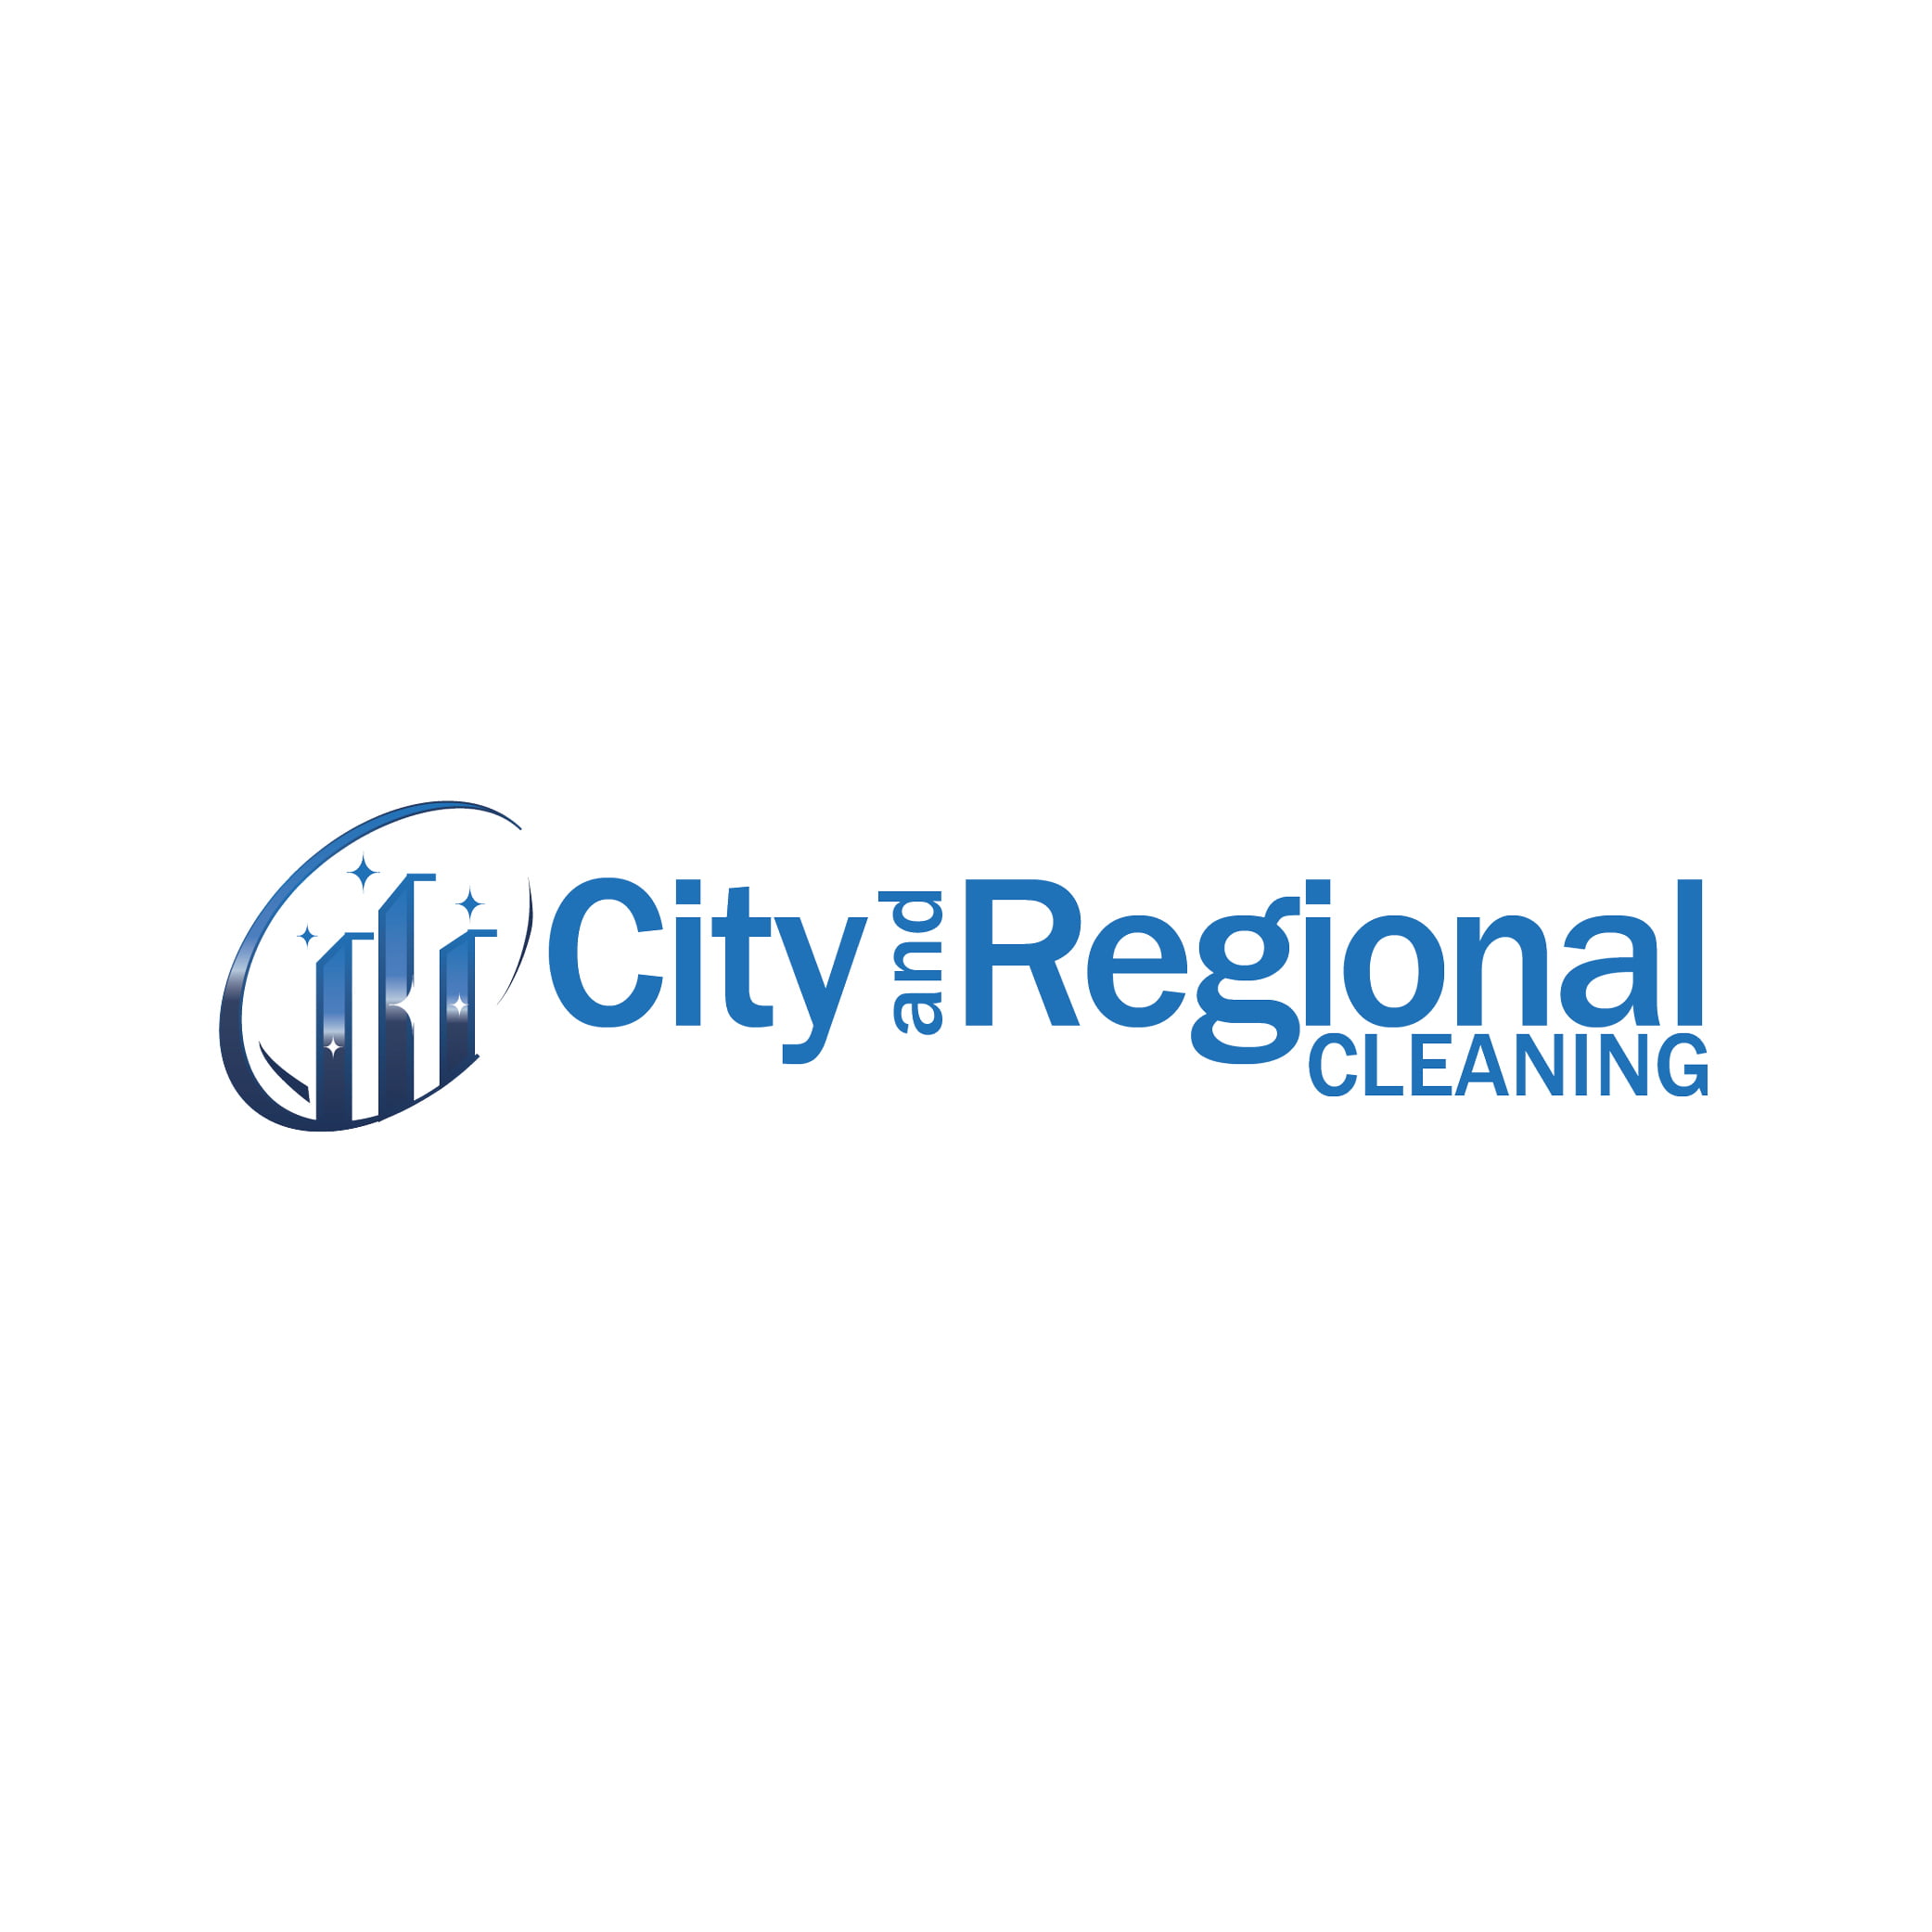 City and Regional Cleaning